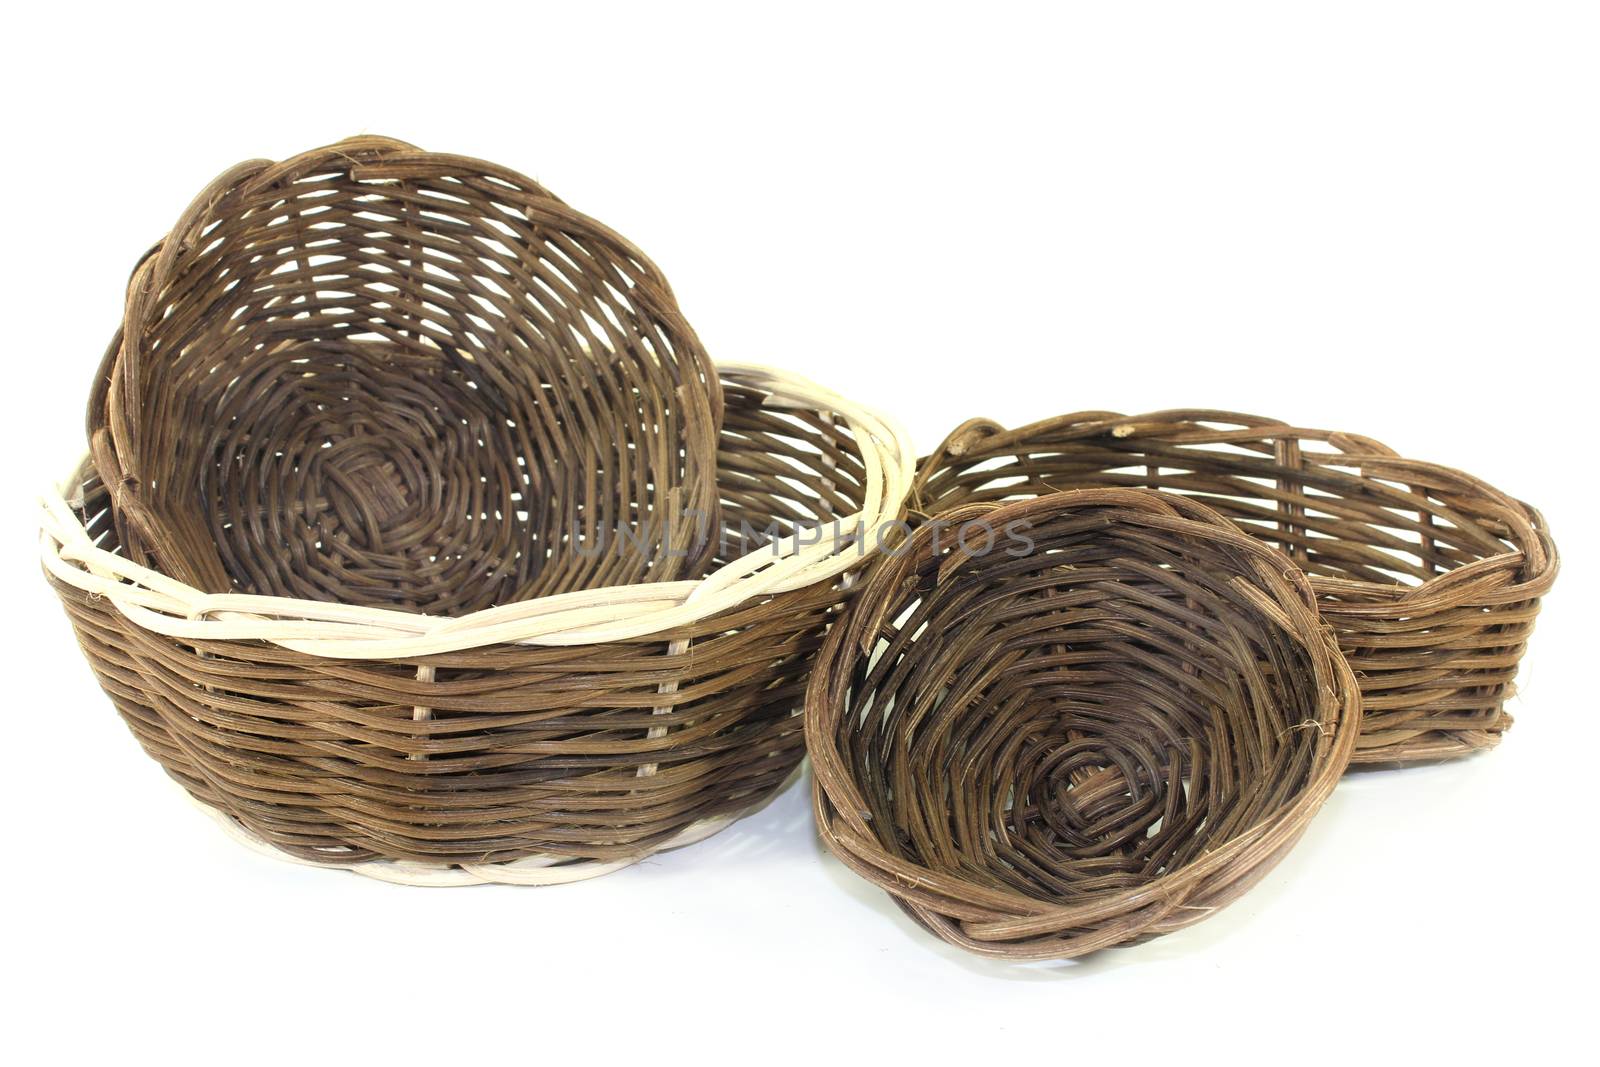 braided wicker baskets against a bright background